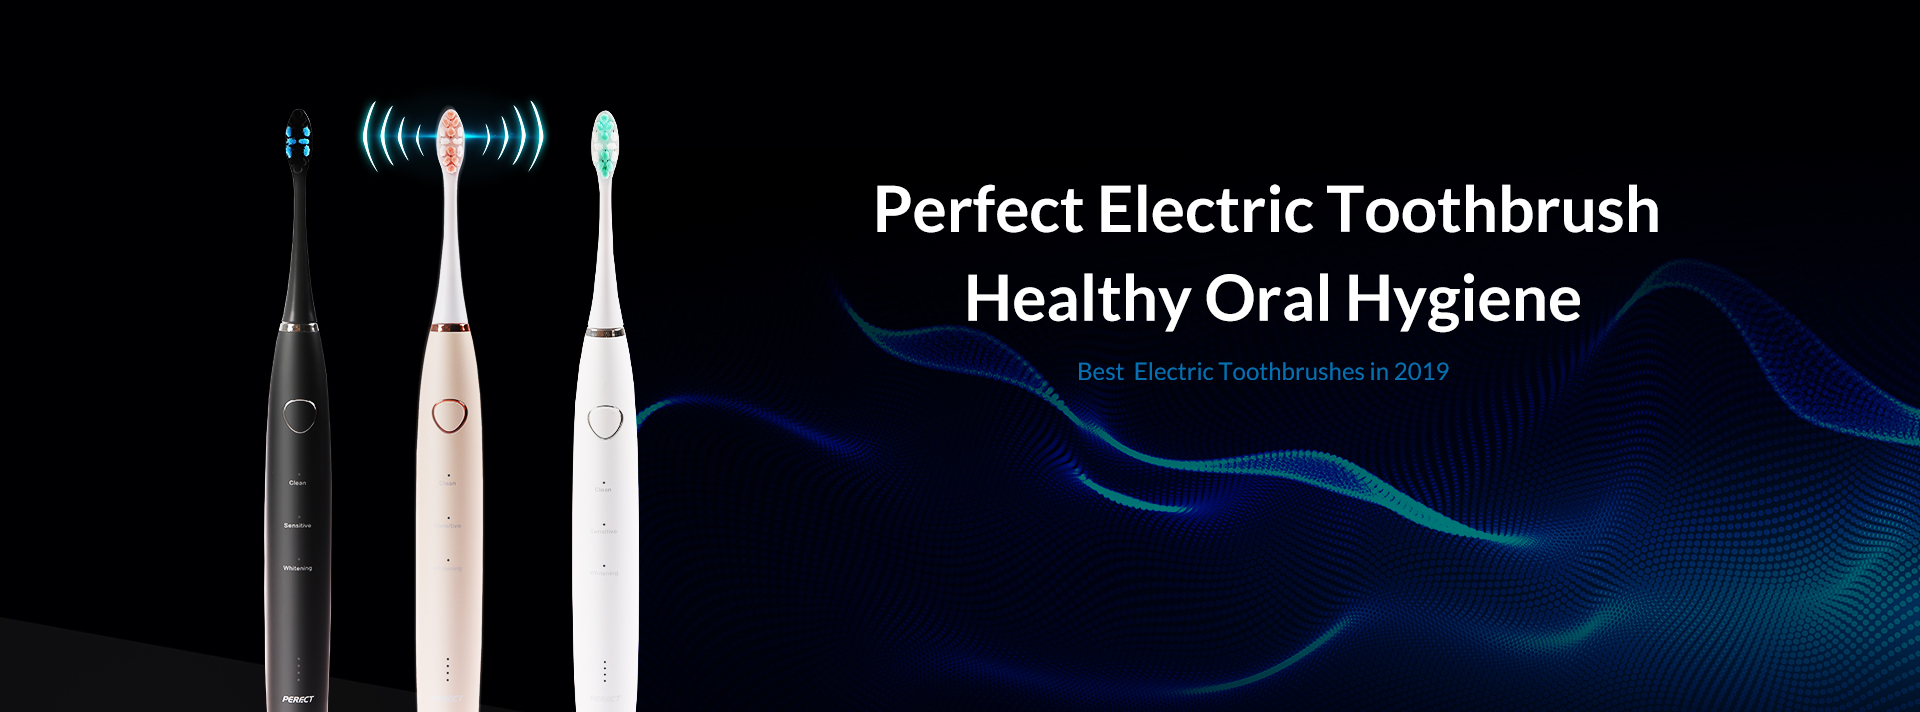 BEST ELECTRIC TOOTHBRUSHES IN 2019